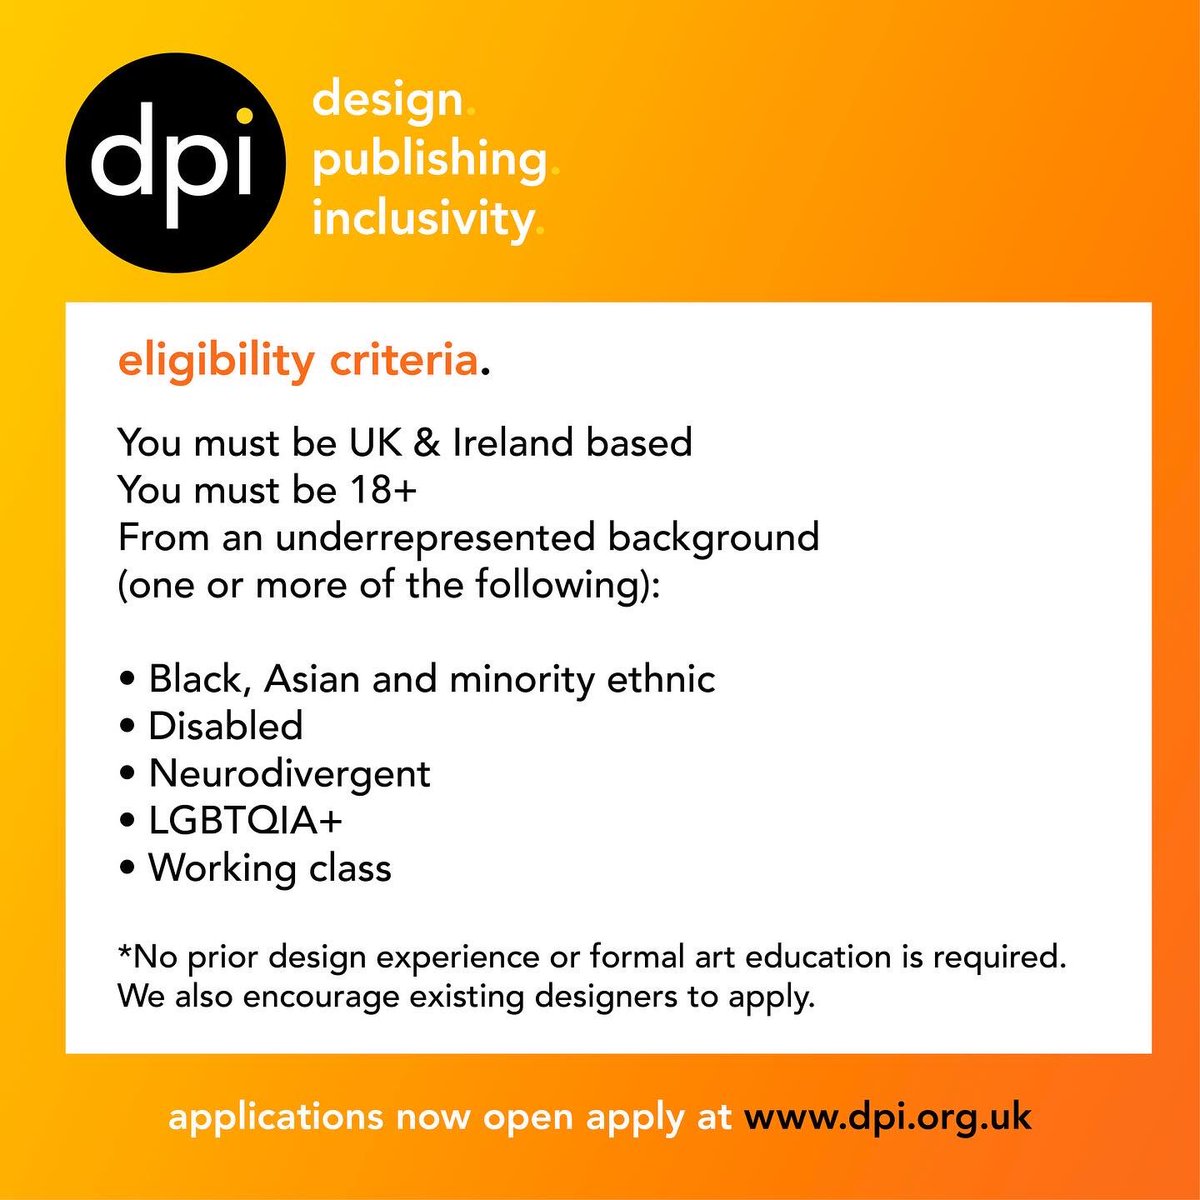 Design Publishing Inclusivity launched today. Give them a follow @dpi_org and visit the website dpi.org.uk to find out more about their mentorship scheme. Please do help spread the word if you can 🧡💛